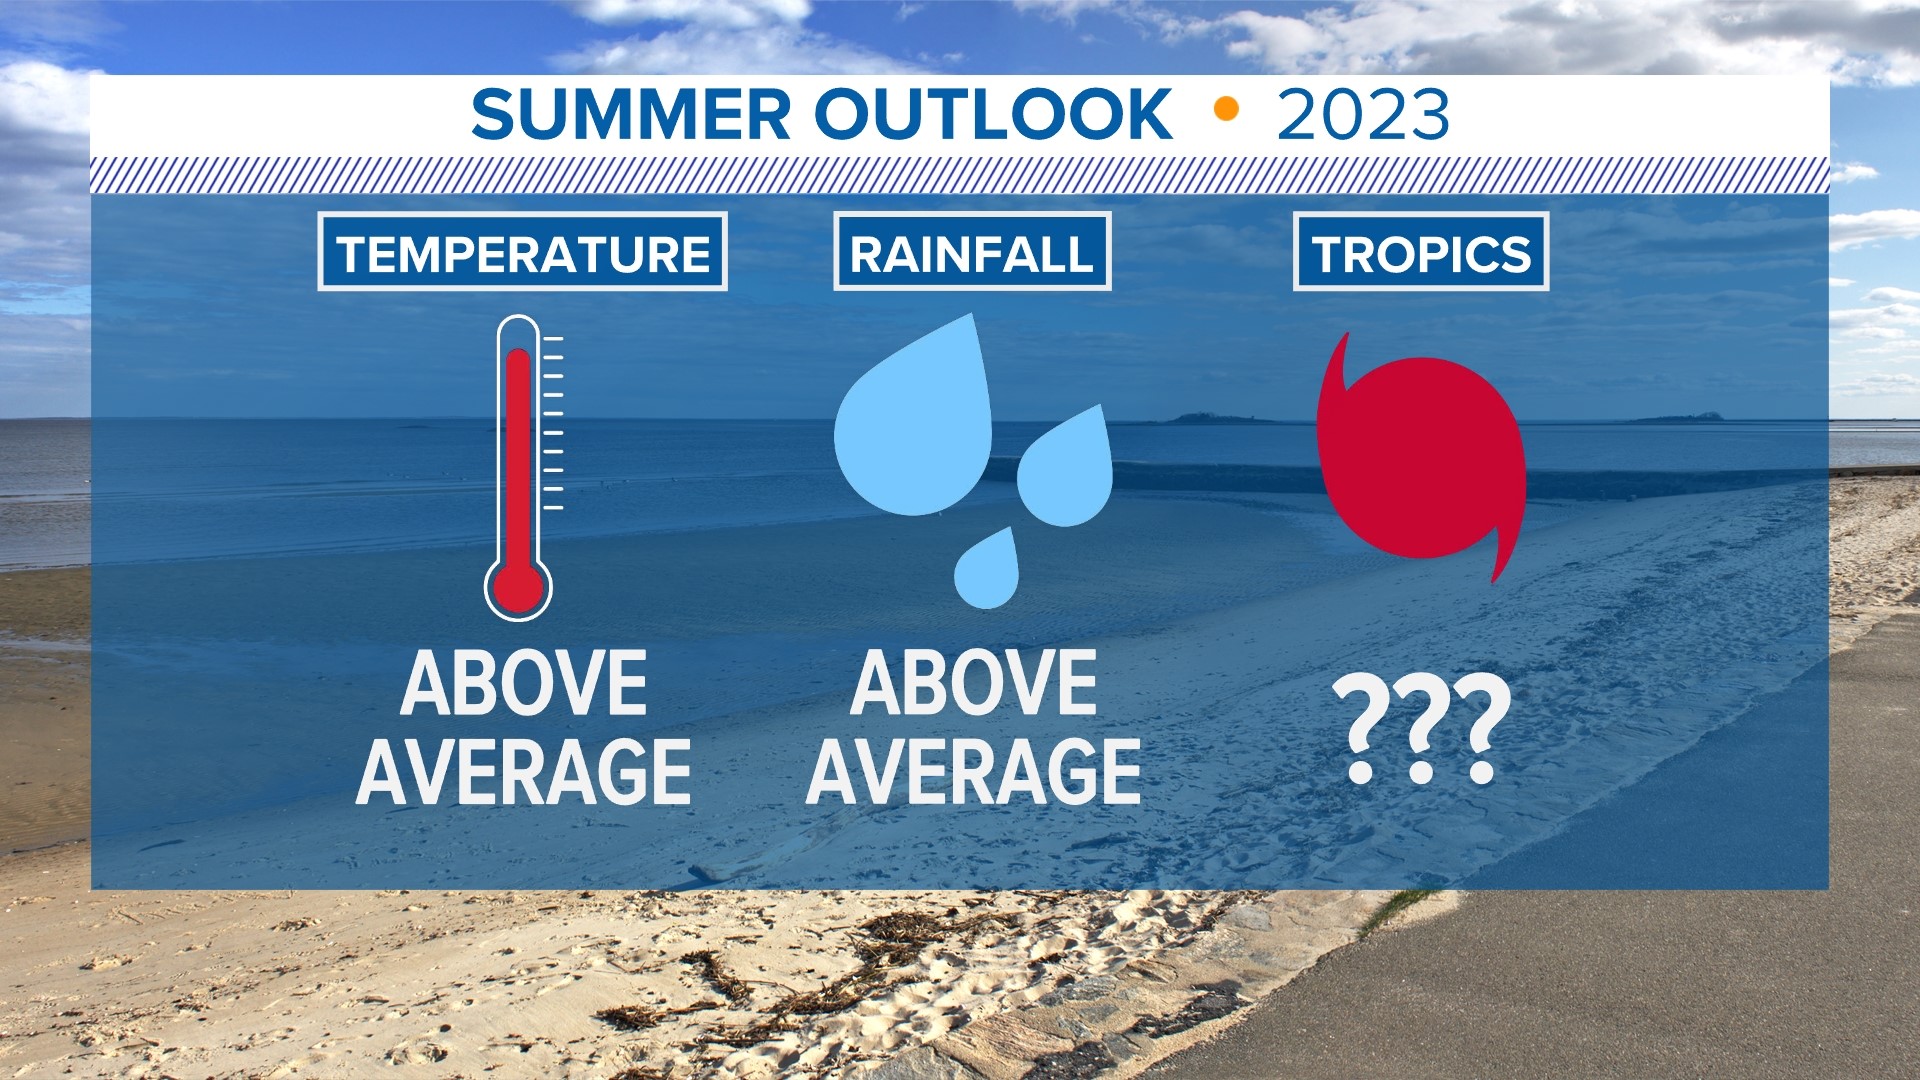 A warmer and wetter summer is possible this year with an uncertain tropical storm threat.